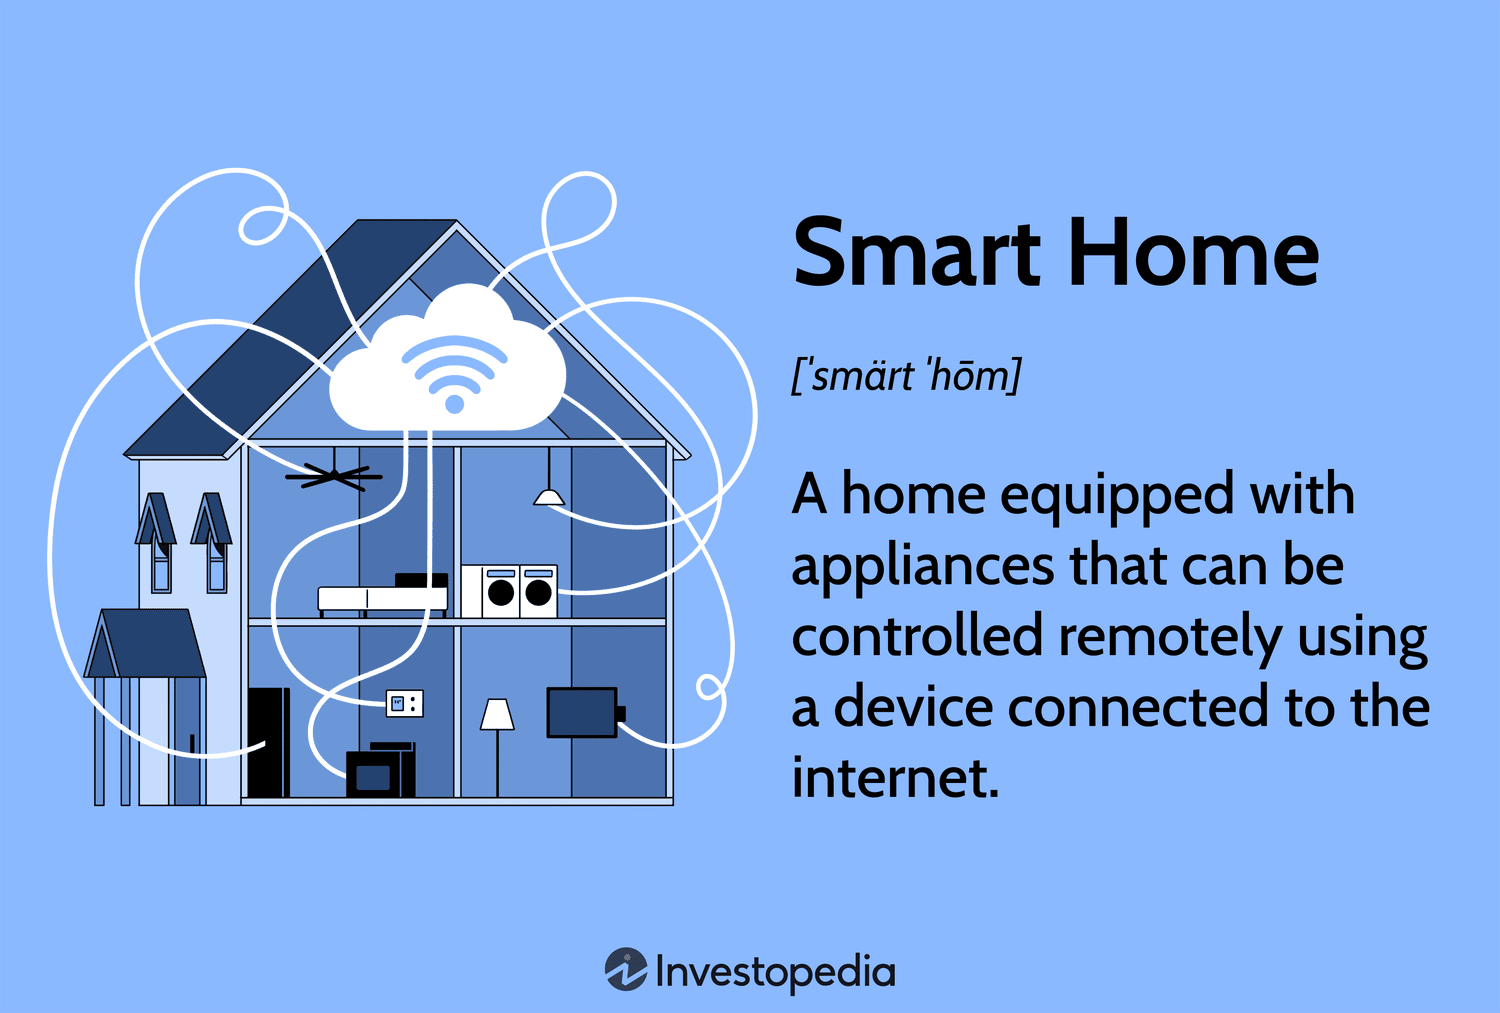 What are the Advantages of Smart Technology in a Home Environment?